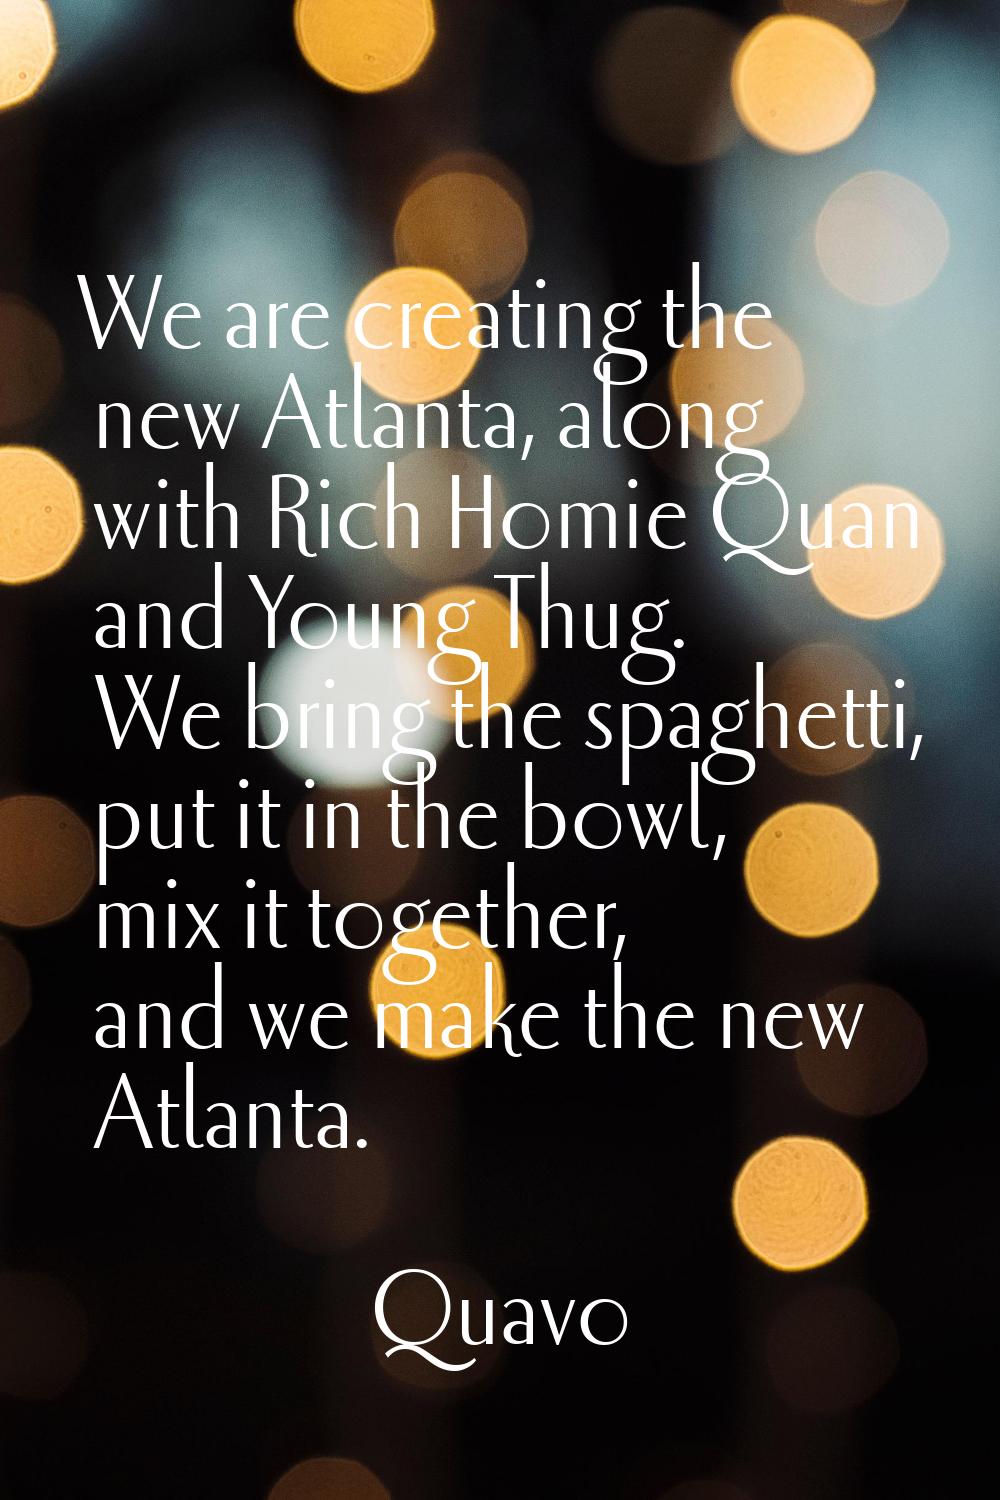 We are creating the new Atlanta, along with Rich Homie Quan and Young Thug. We bring the spaghetti,